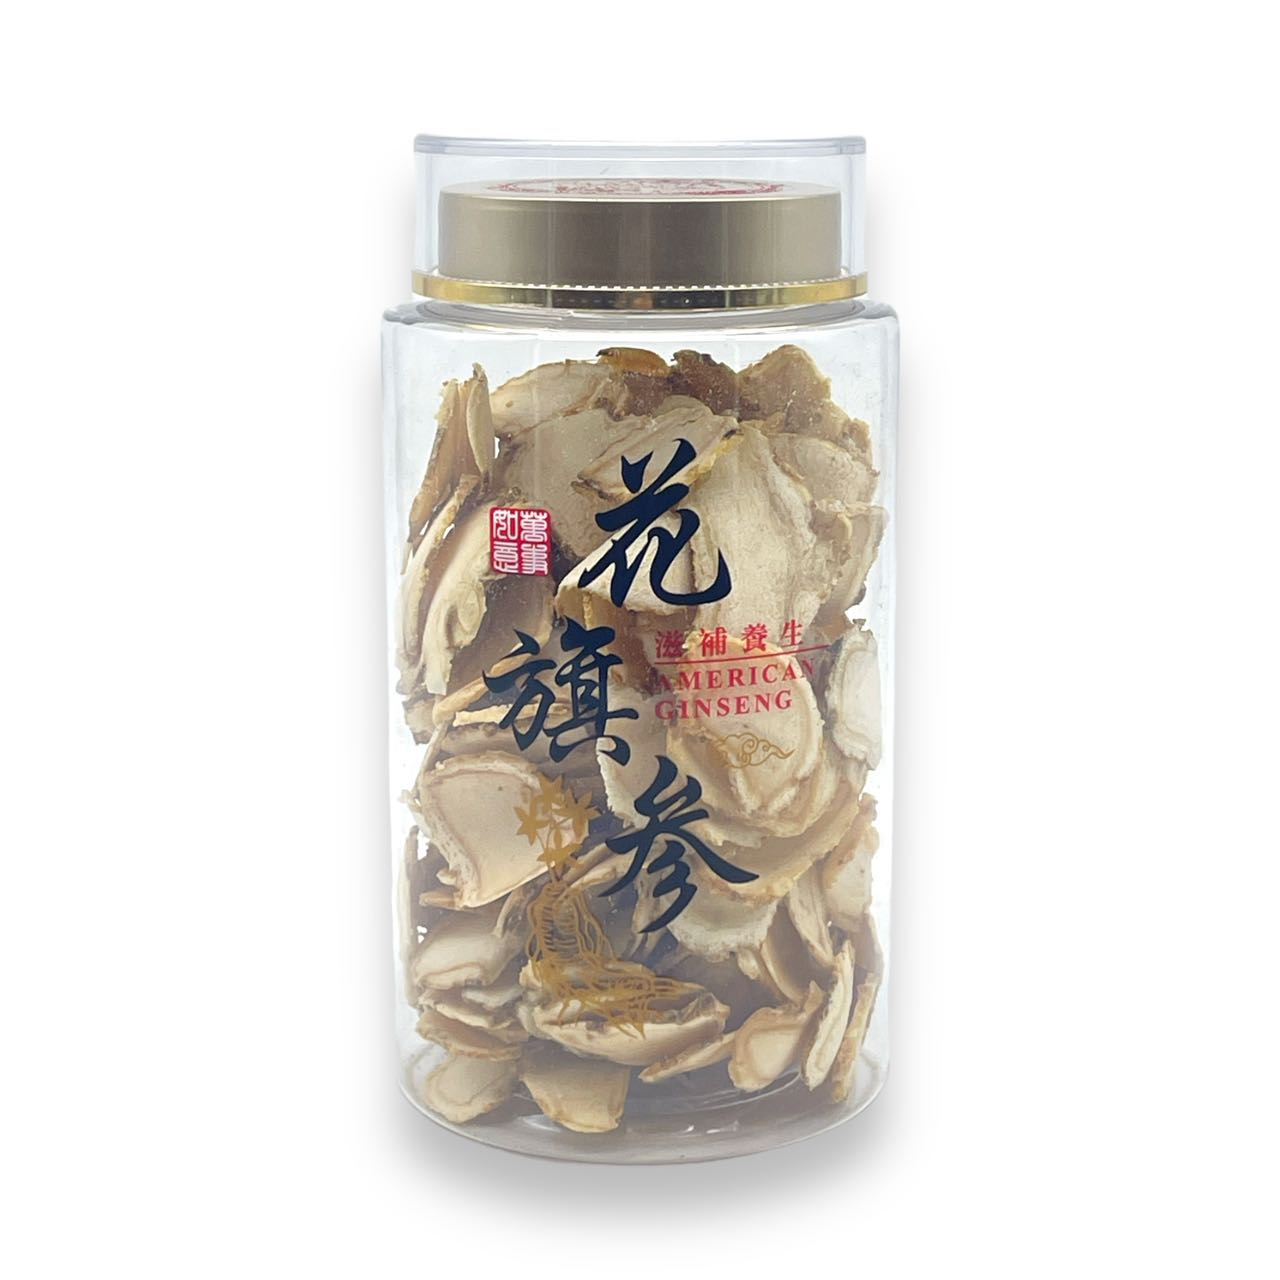 "NATIVE ULTRA" Canadian 5-Year Ginseng Slices, 120g/bottle